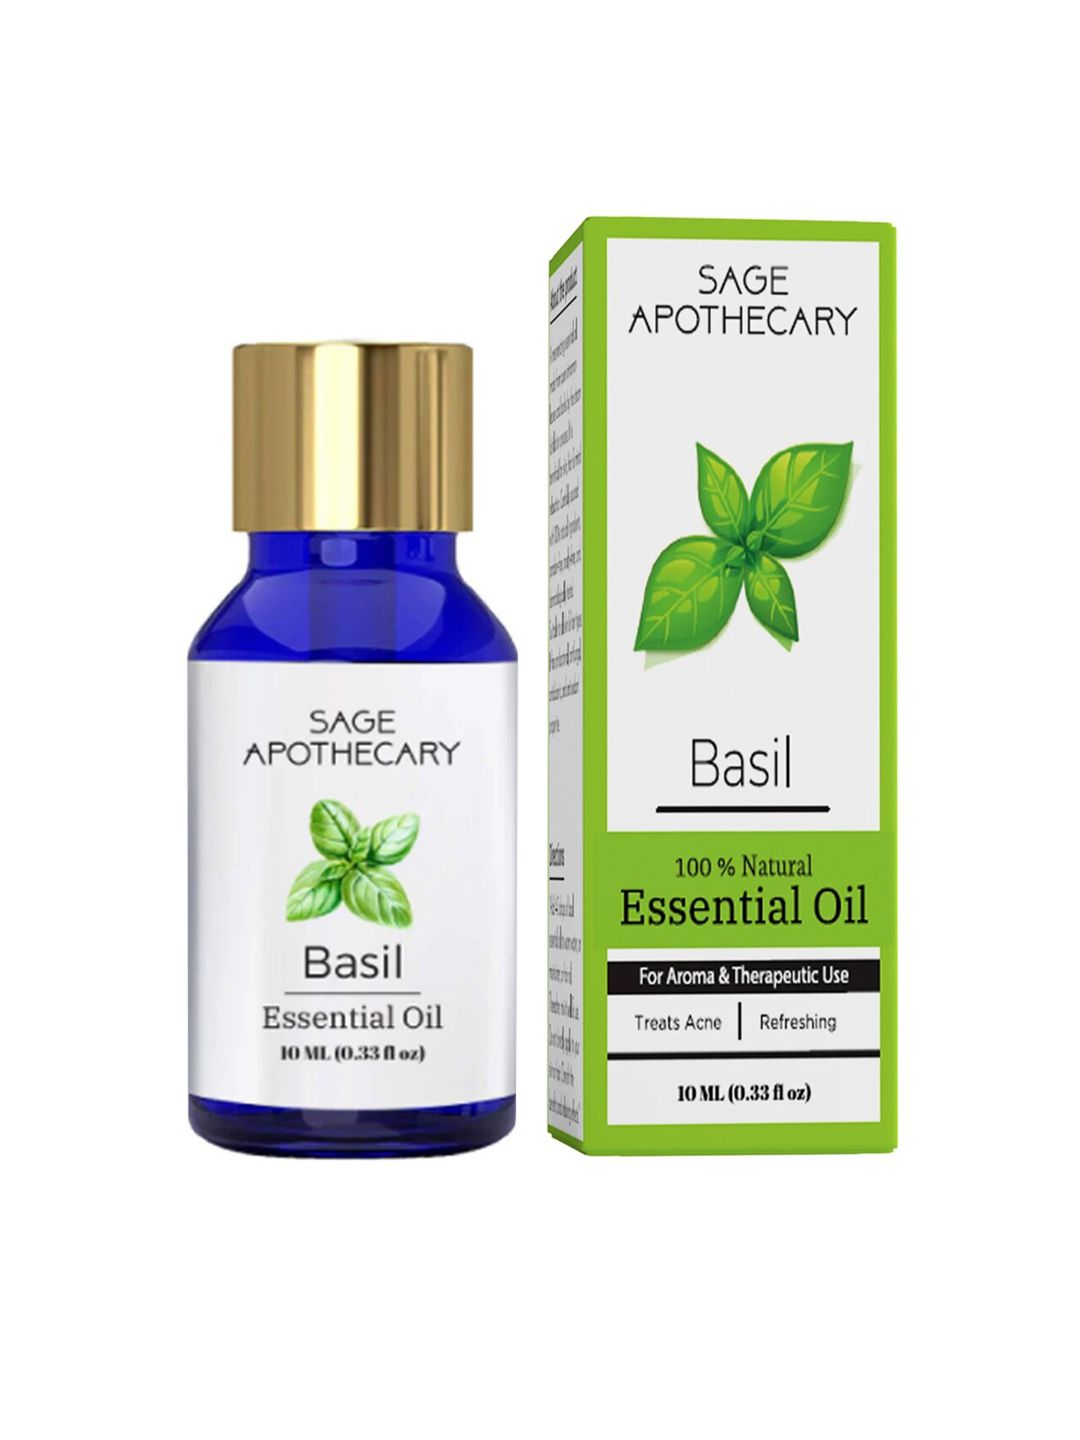 SAGE APOTHECARY Basil Essential Oil - 10ml Price in India